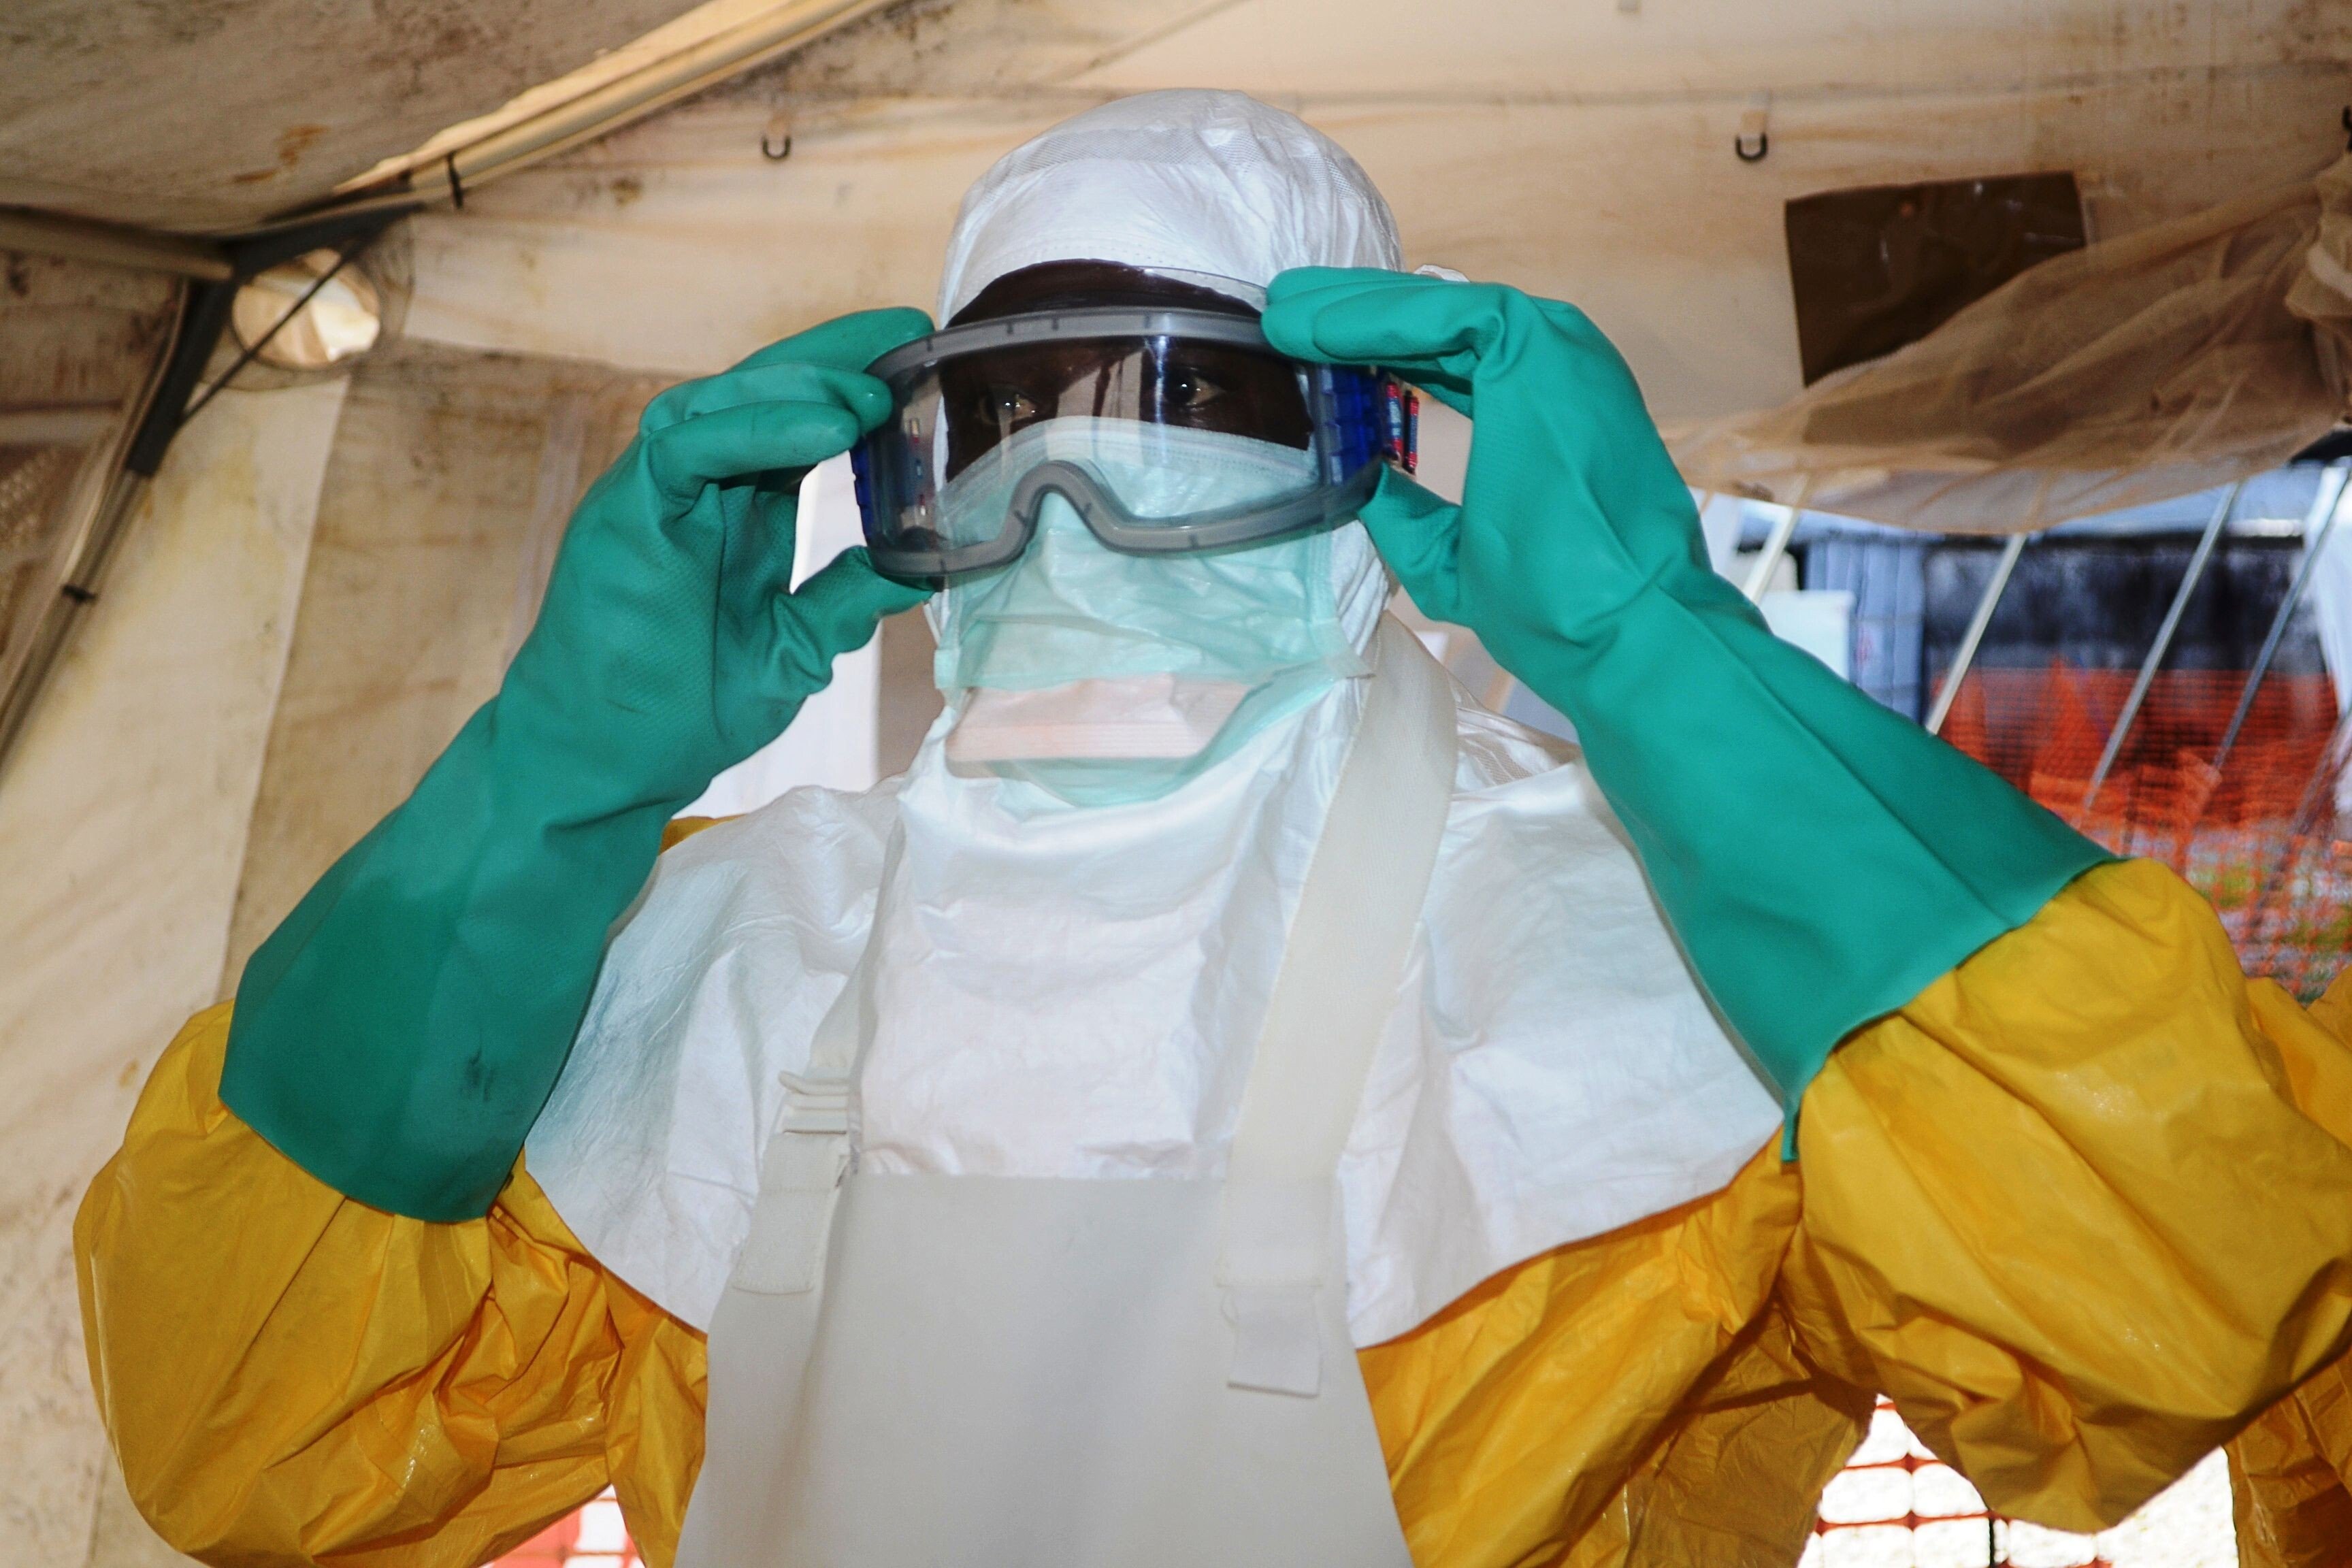 A medical worker puts on protective gear in an isolation ward of a hospital in Guinea, which is seeing the first resurgence of the Ebola haemorrhagic fever since a 2013-2016 epidemic left thousands dead. Photo: AFP